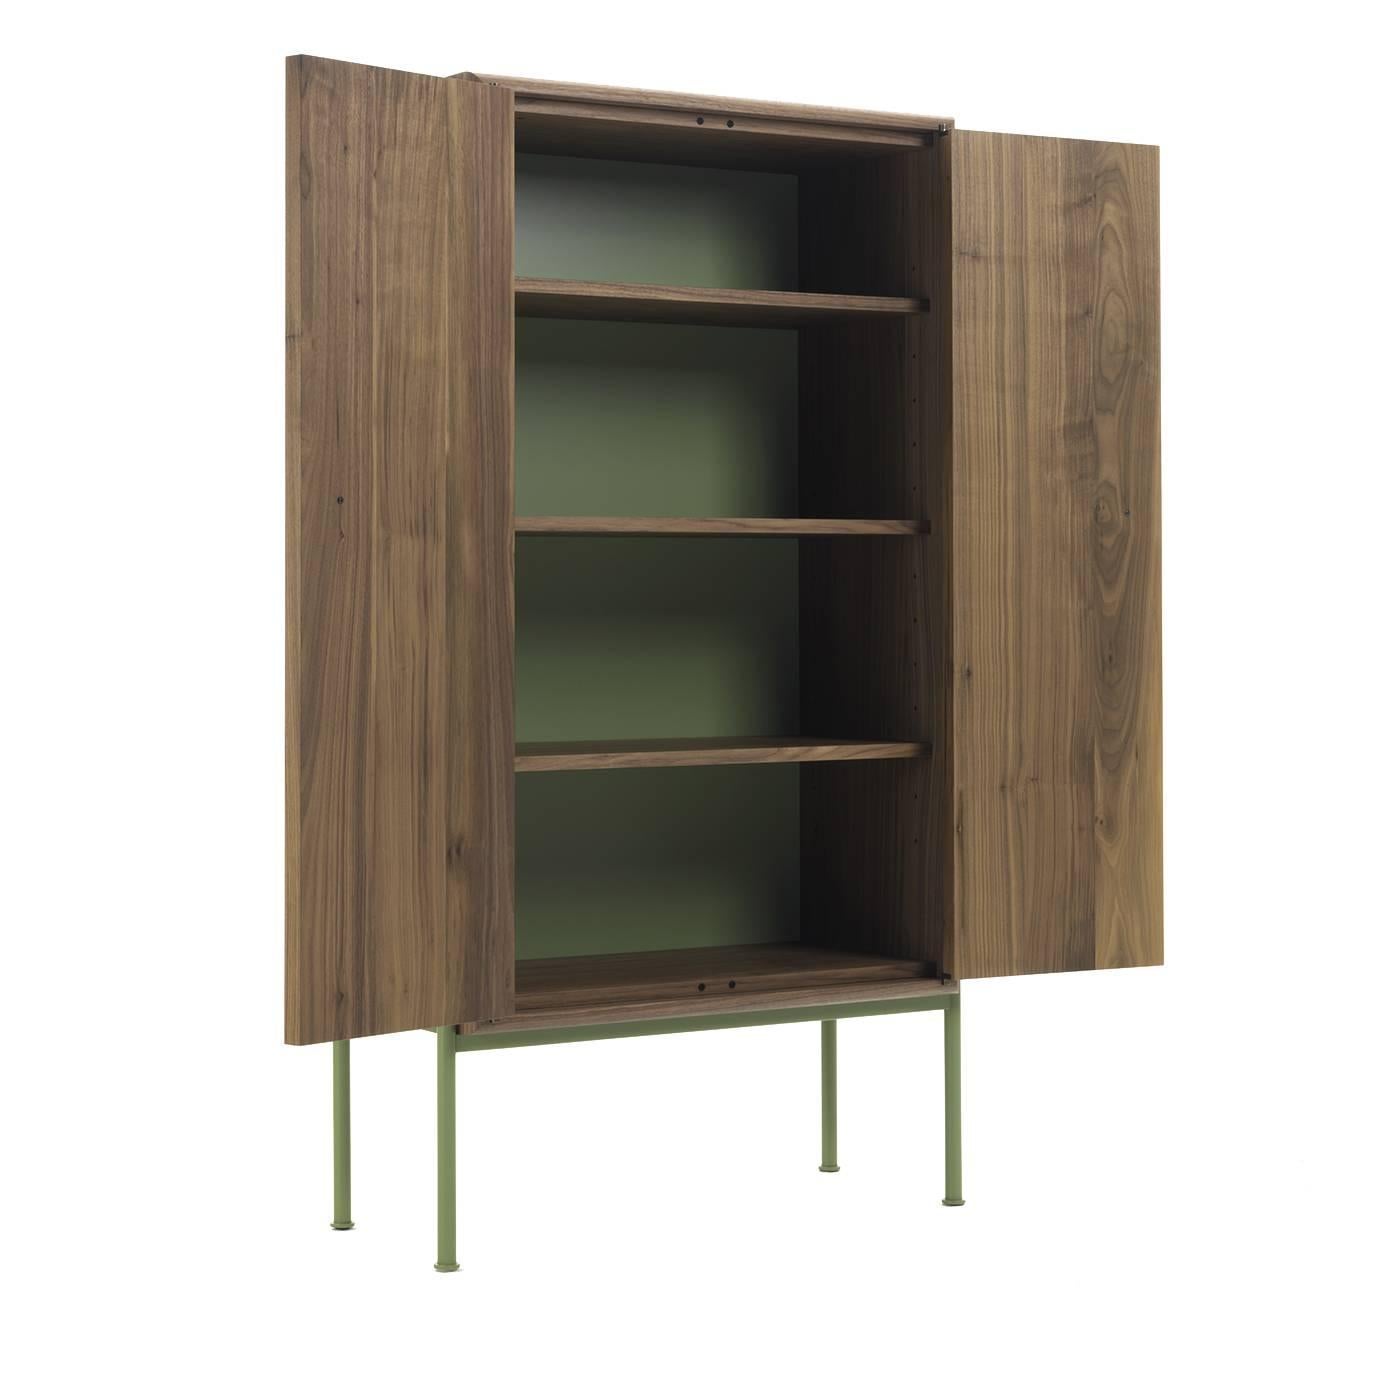 The surface of this imposing cabinet evokes the texture of the skin, whose subtle sensuality transpires from the straight lines and geometric volumes of its Minimalist silhouette. The rectangular body is crafted of Canaletto walnut and rests on an